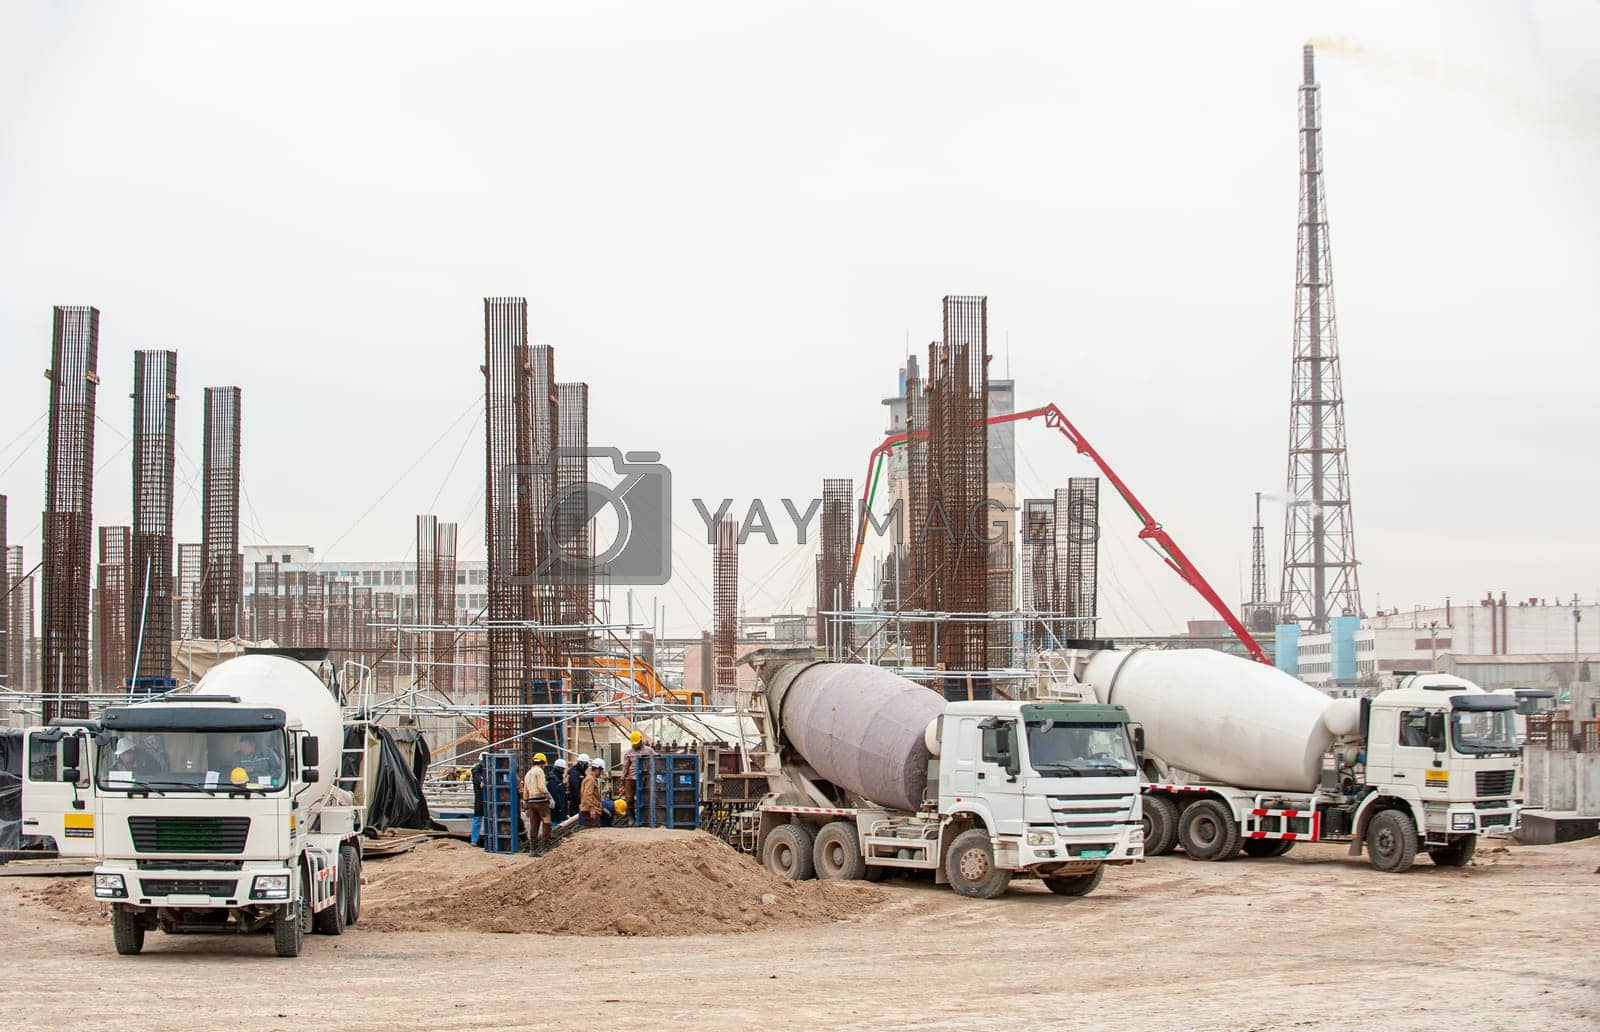 Royalty free image of An oil and gas industry with an industrial construction view with tracks and tools outdoors by A_Karim